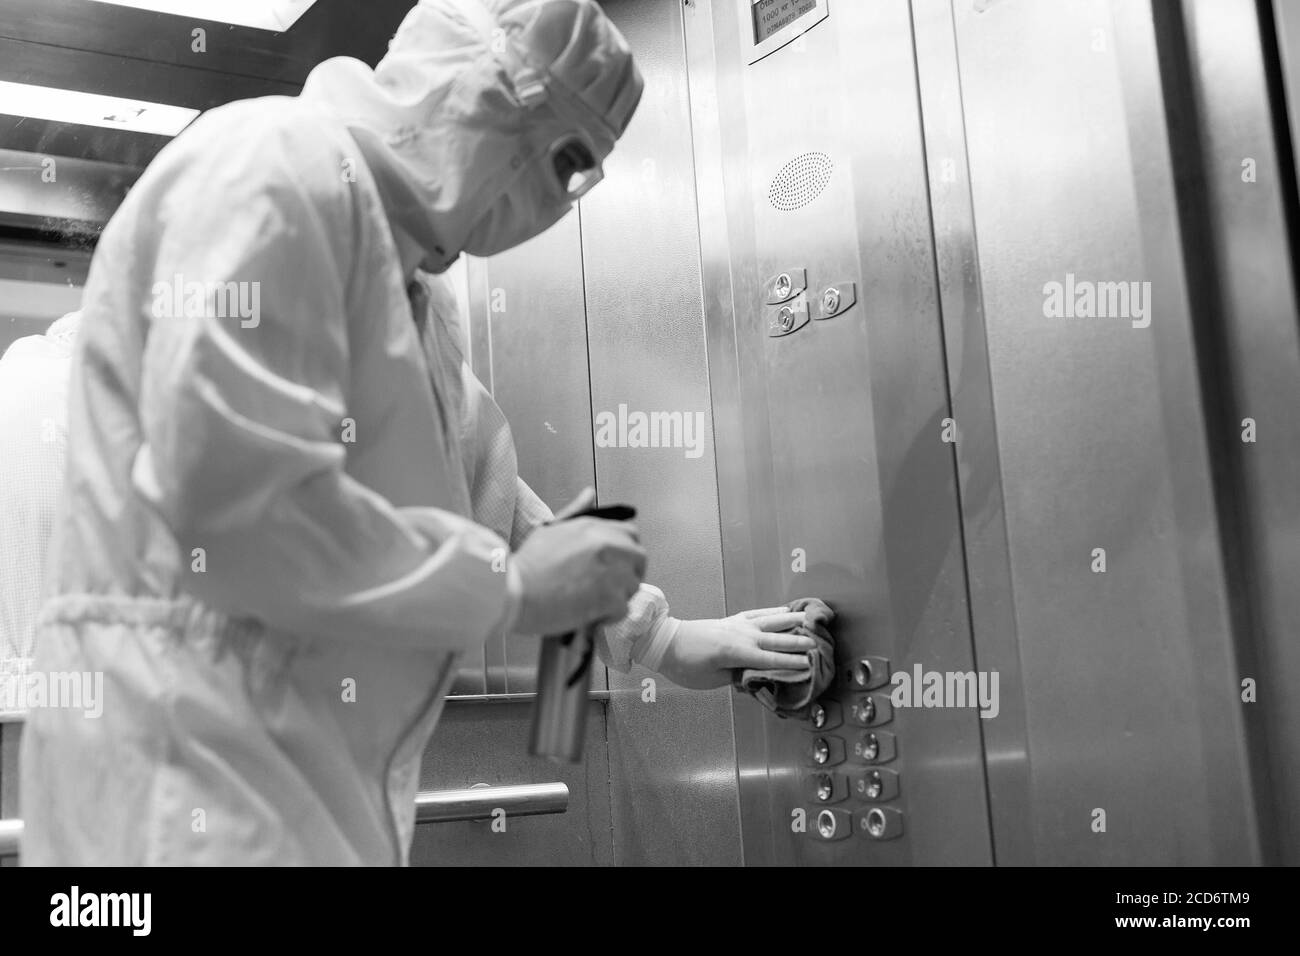 Coronavirus infection. Paramedic in protective mask and costume disinfecting an elevator with sprayer, Stock Photo